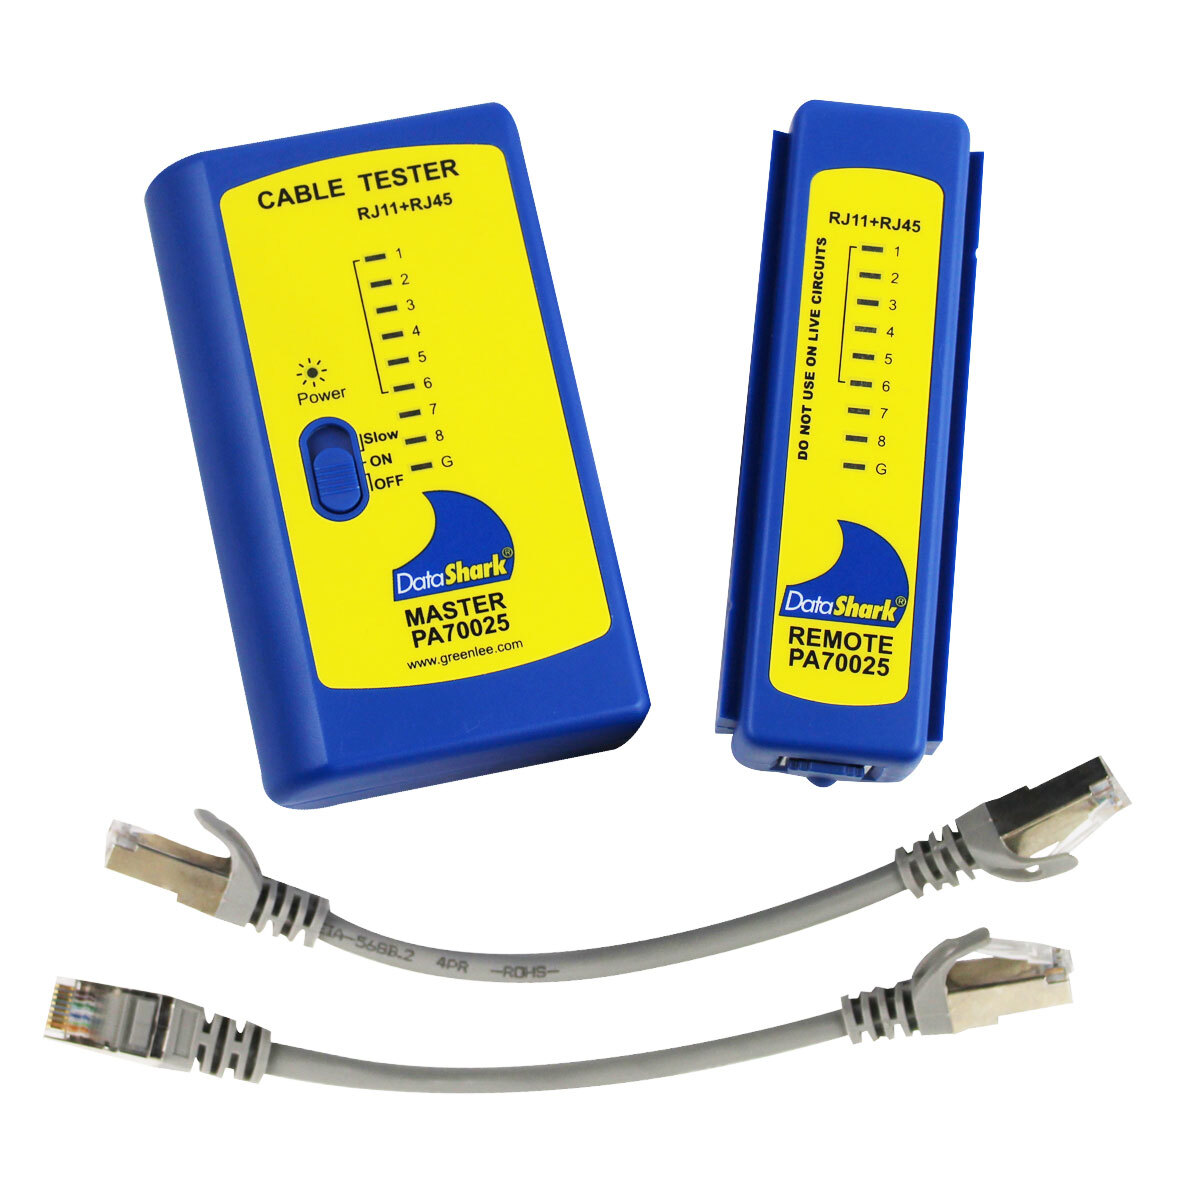 DataShark PA70025 LAN Cable-Check RJ 45 Network Cable Tester Formerly Greenlee Communications Troubleshoot Installation Problems Test Computer Patch Cords or Installed Cable Runs